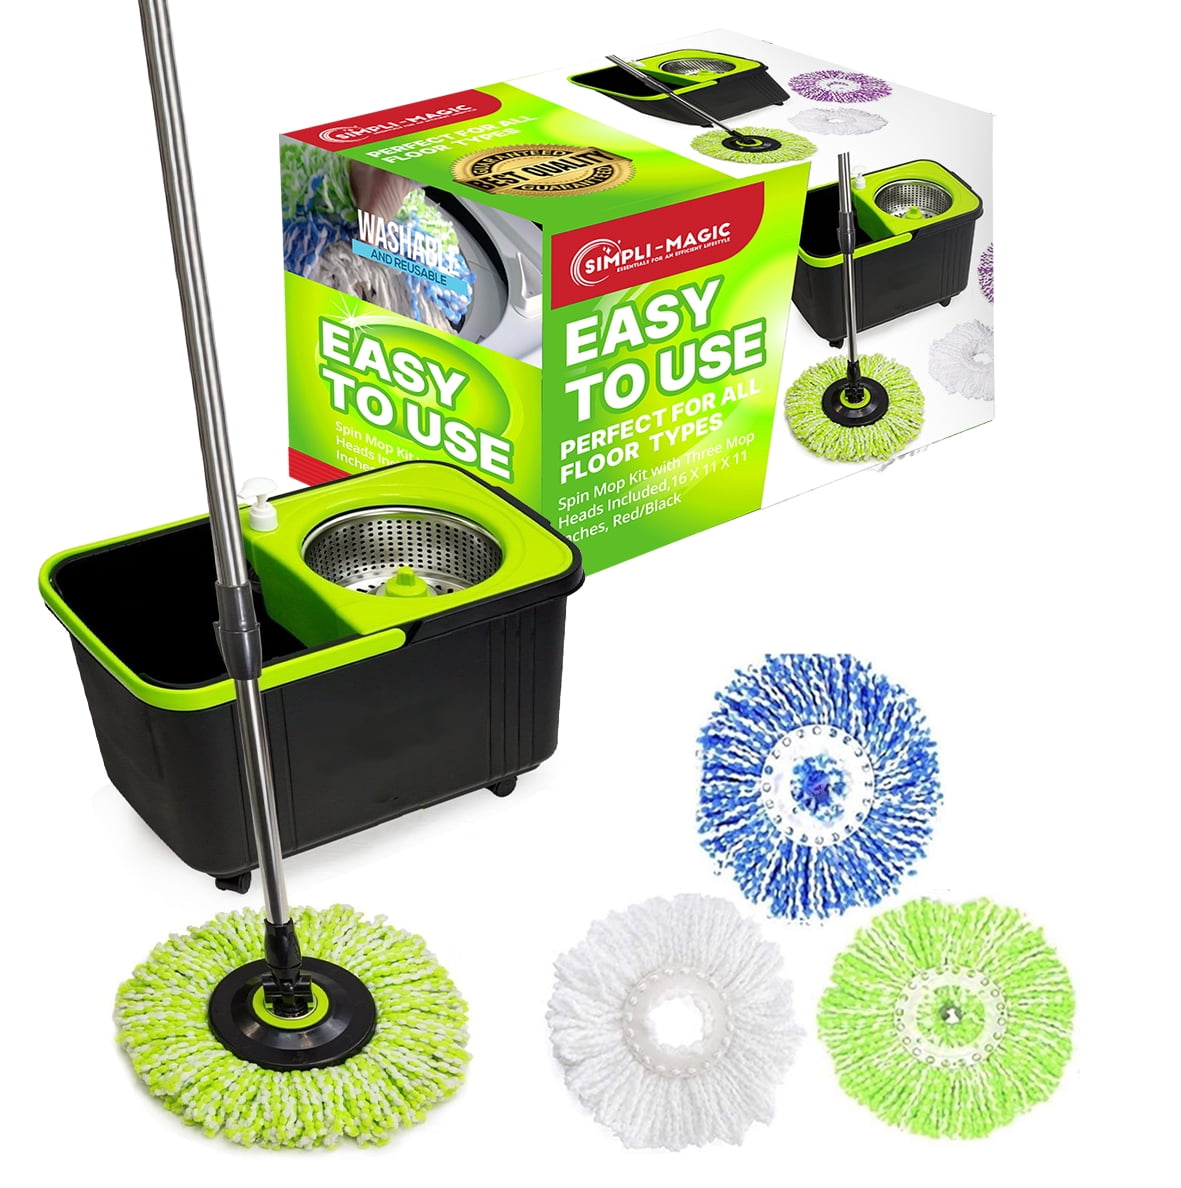 Cheap as Chips - The new deluxe spin mop! Get your hands